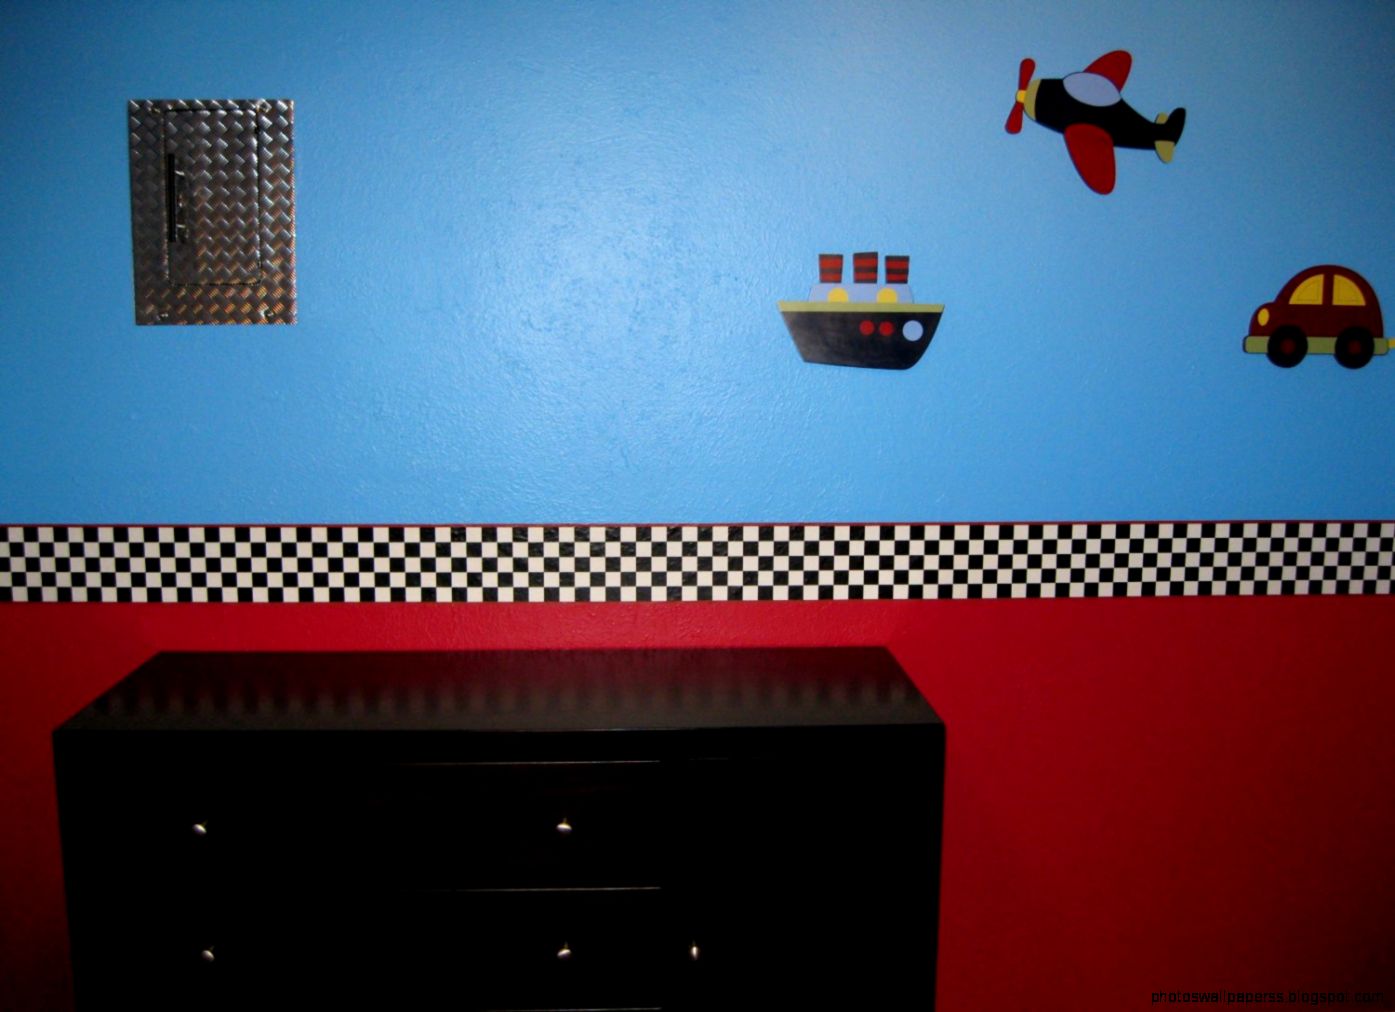 Checkered Flag Cars Nascar Wallpaper Border 6 Inch - Chest Of Drawers - HD Wallpaper 